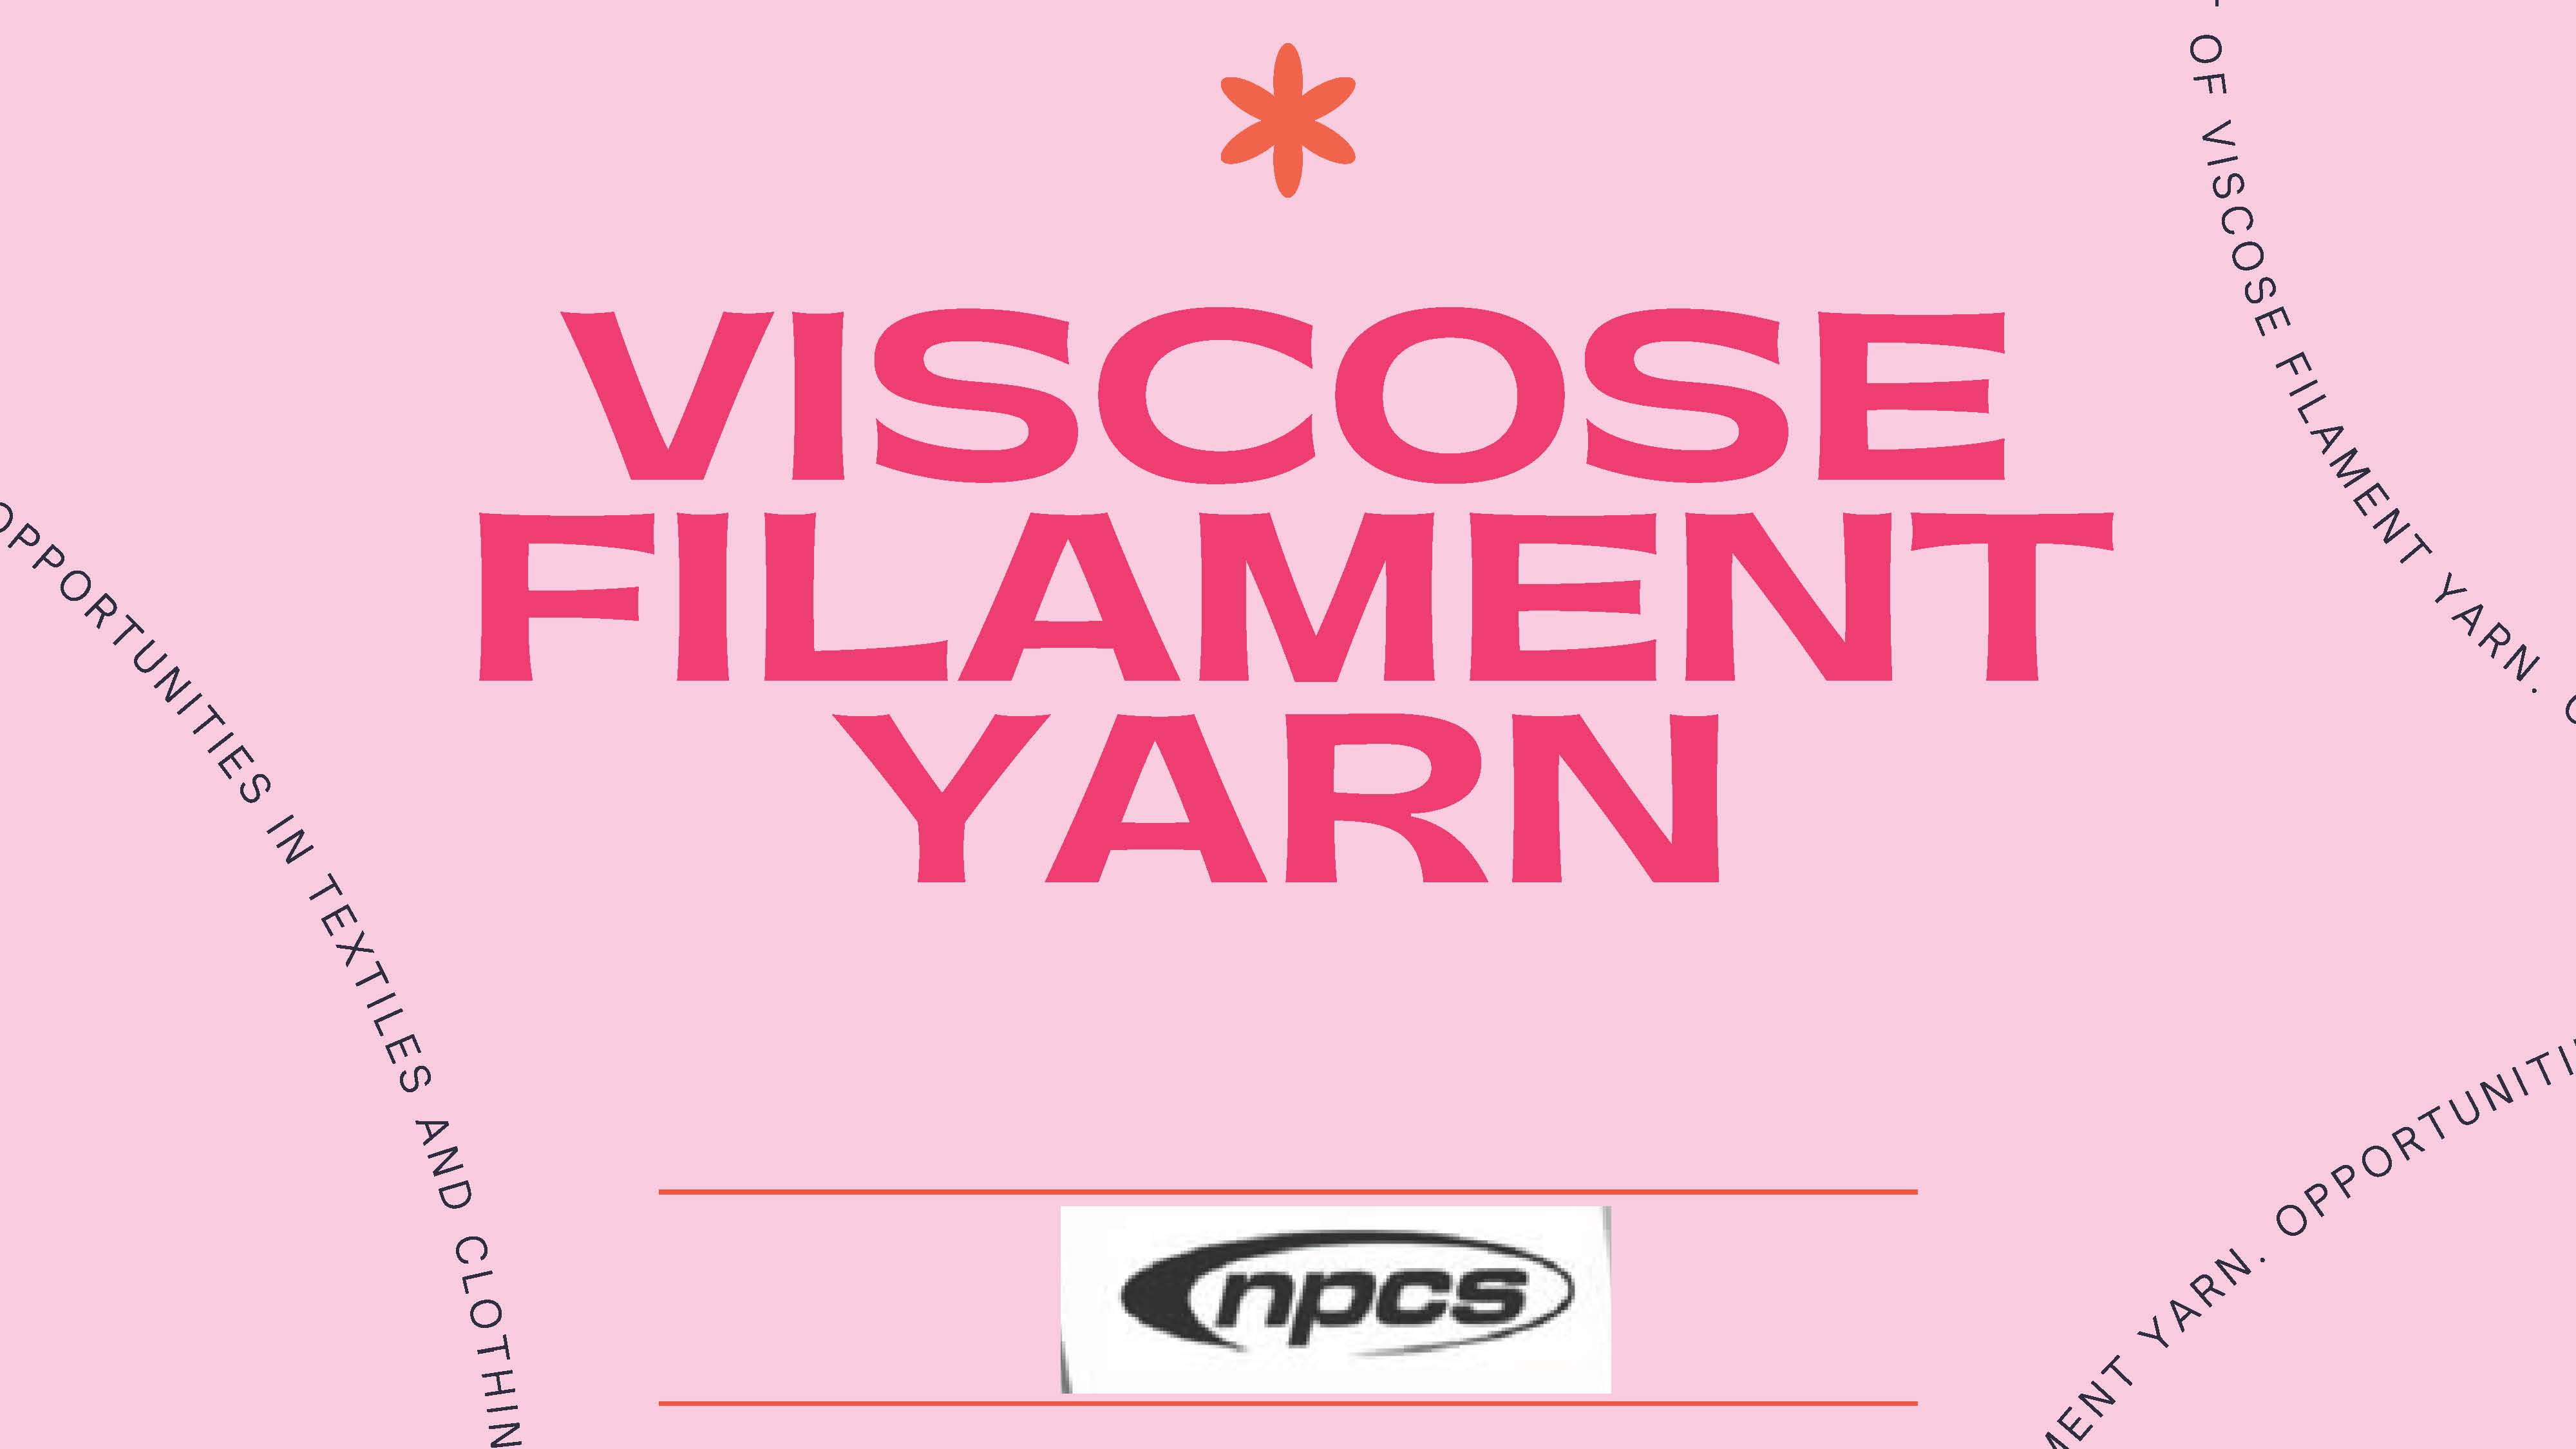 Manufacturing Business of Viscose Filament Yarn Opportunities in Textiles and Clothing Market